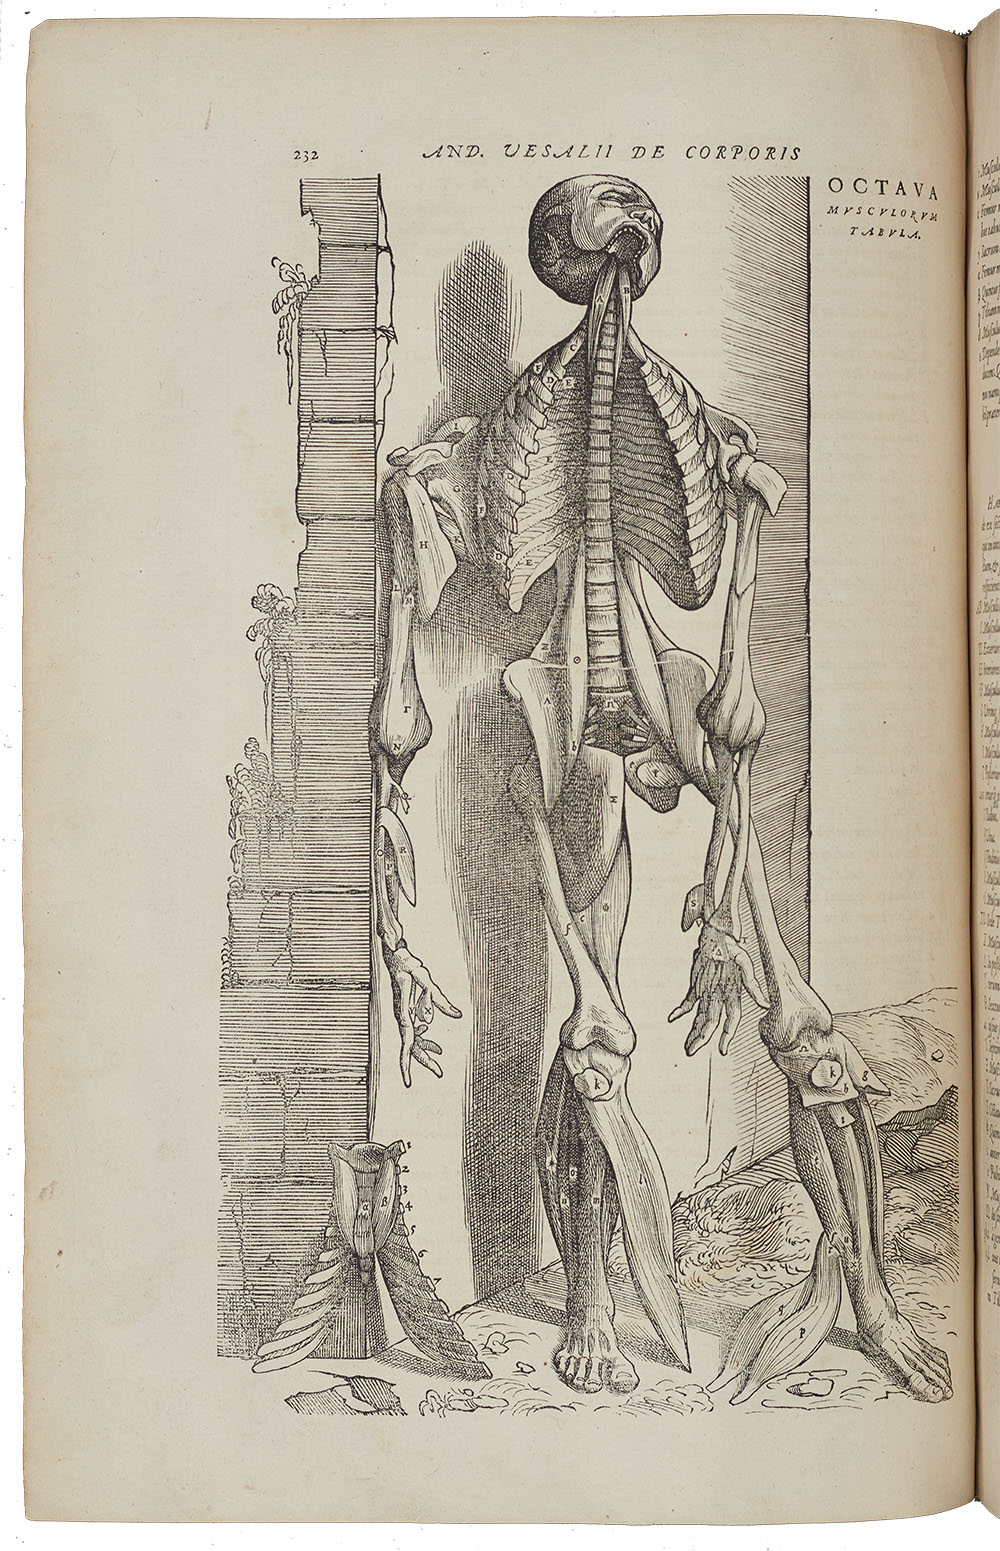 <p>Observational anatomical drawing of a human showing the removal of skin and muscles to show the human skeleton. Vesalius’ ‘Fabric of the Human Body’ was a turning point in medicine for the detailed drawings and descriptions it offered of human anatomy.</p>
